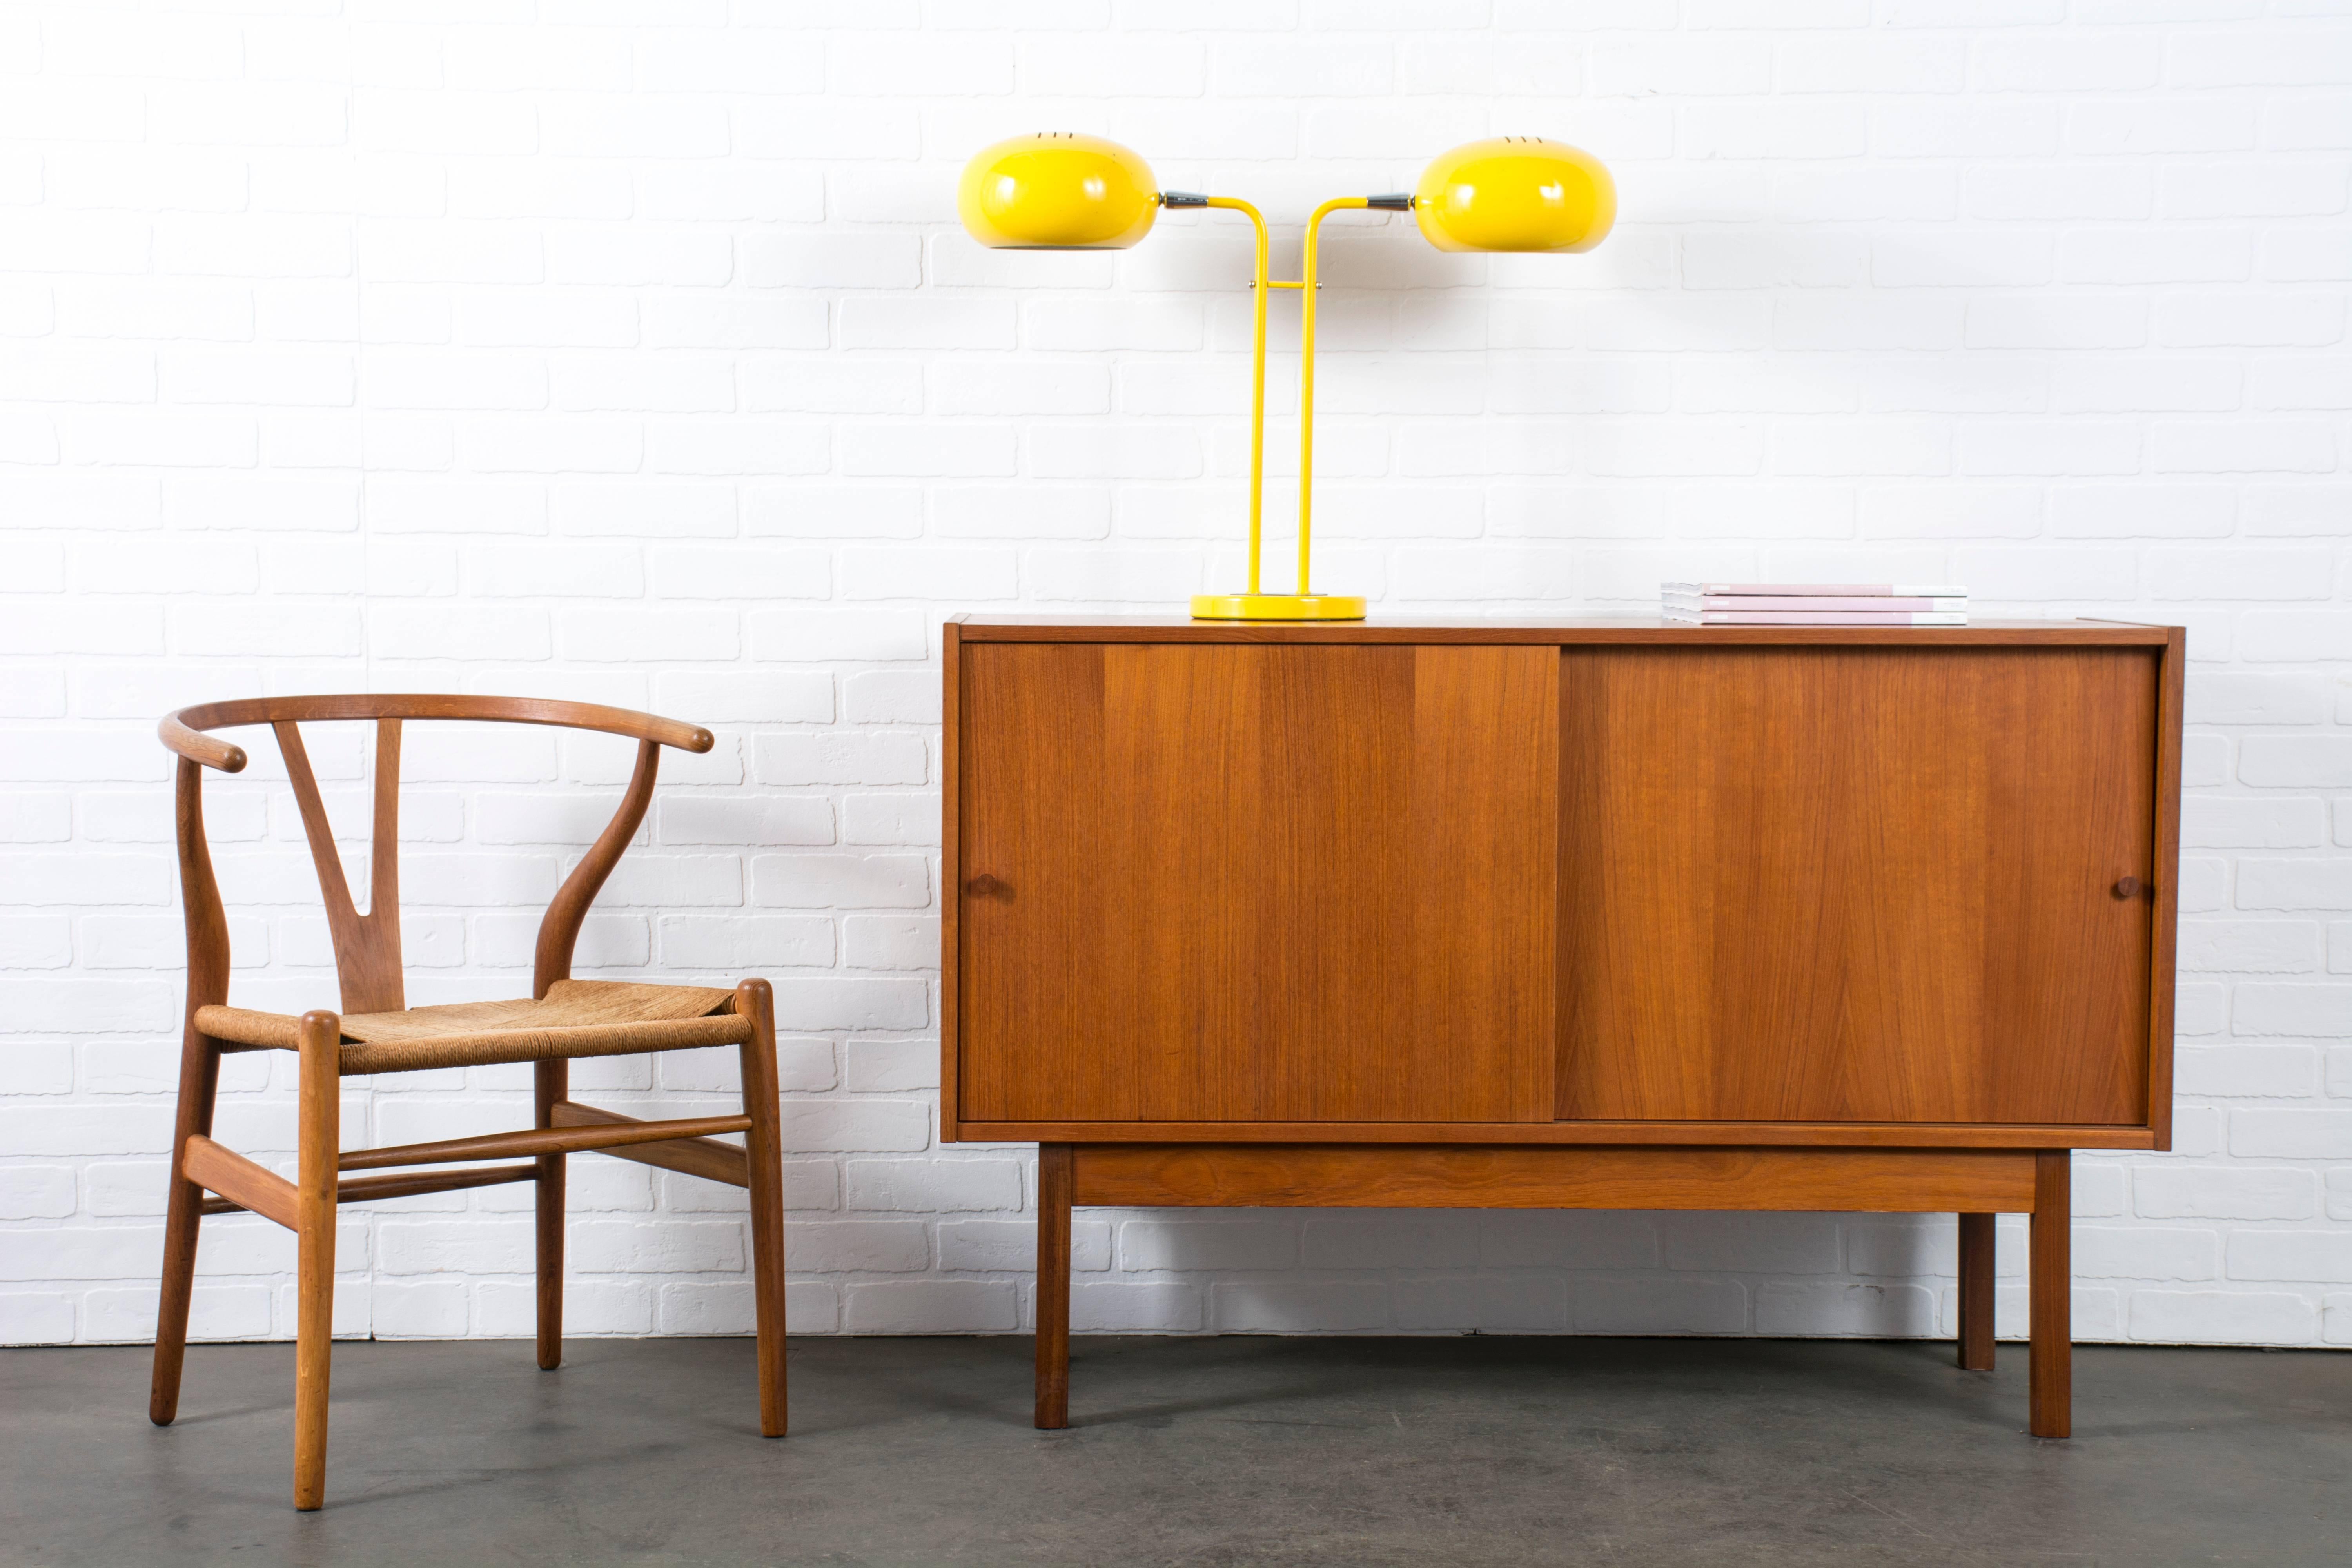 This is a vintage Mid-Century yellow desk lamp with two shades. The shades tilt and can be turned on separately (switch below each shade). Chrome details.
